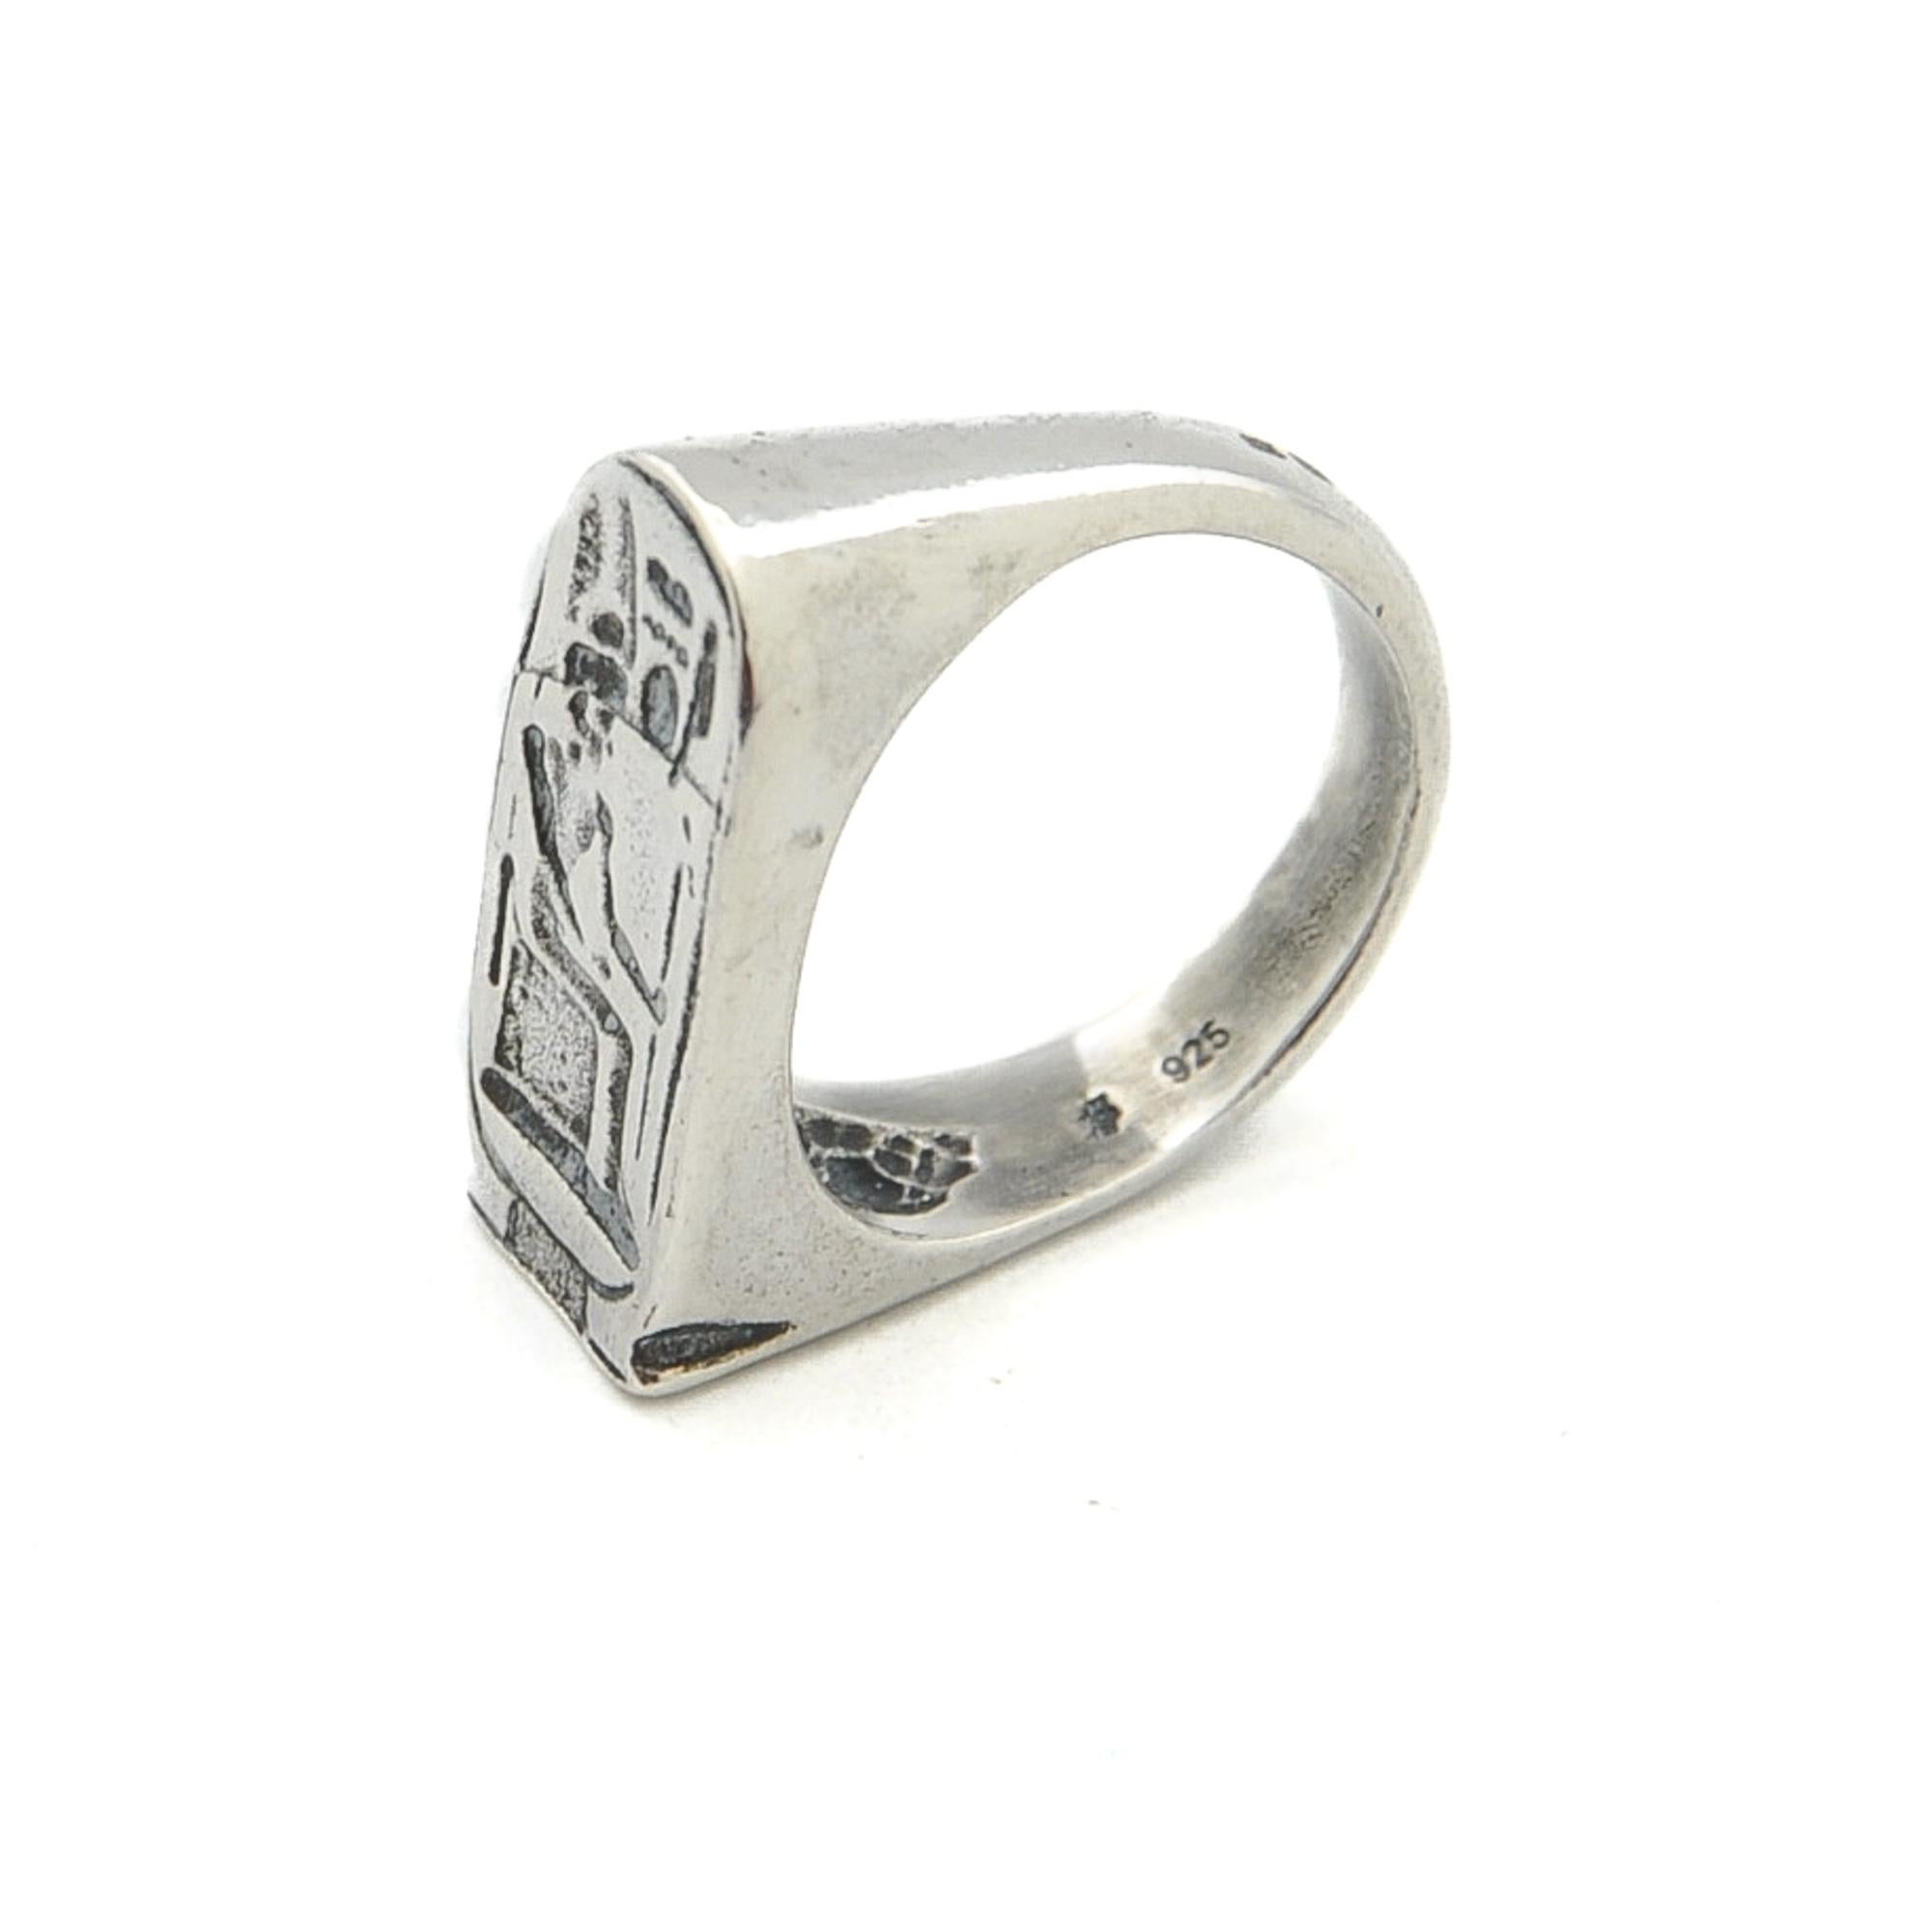 A beautiful Egyptian Revival stirrup-shaped ring depicting a pharaoh with Egyptian hieroglyphic symbols. The pharaoh sits on his throne and holds a scepter in his hand. Some Egyptian hieroglyphs can be seen above the pharaoh. These were symbols of